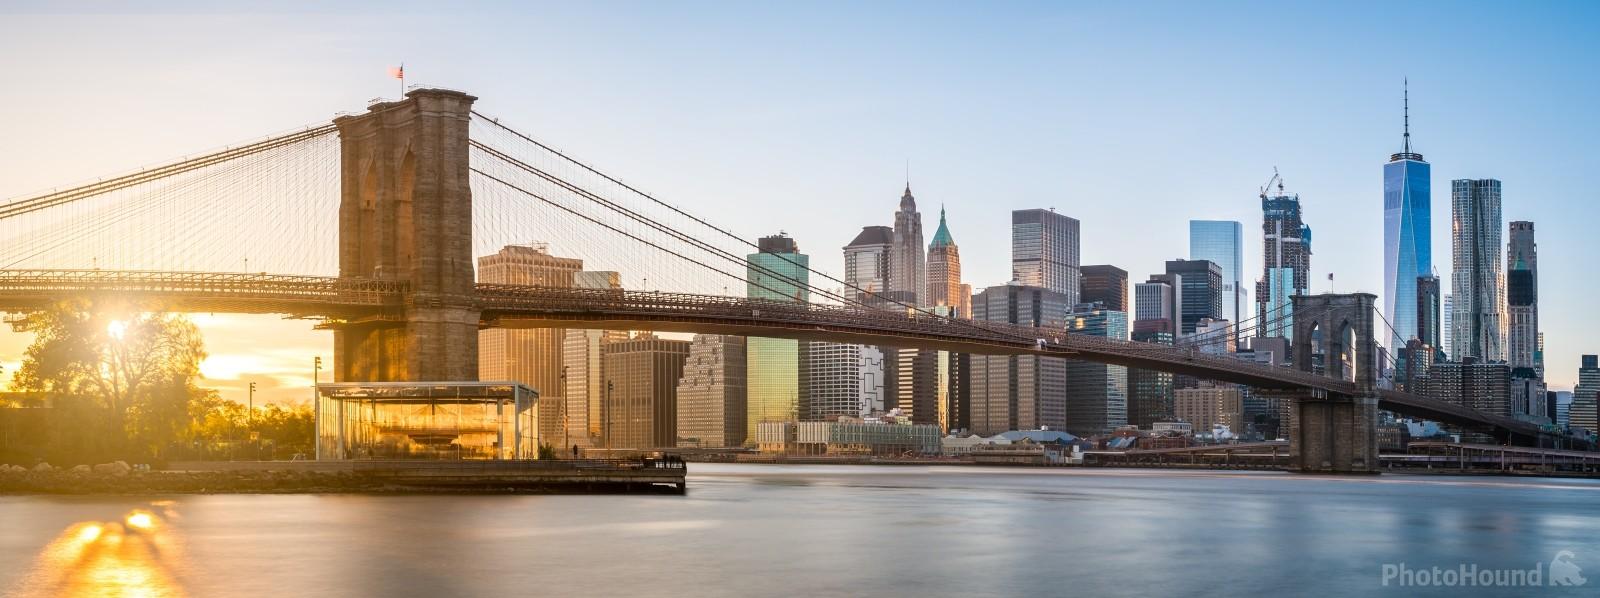 Image of Lower Manhattan from Dumbo by VOJTa Herout